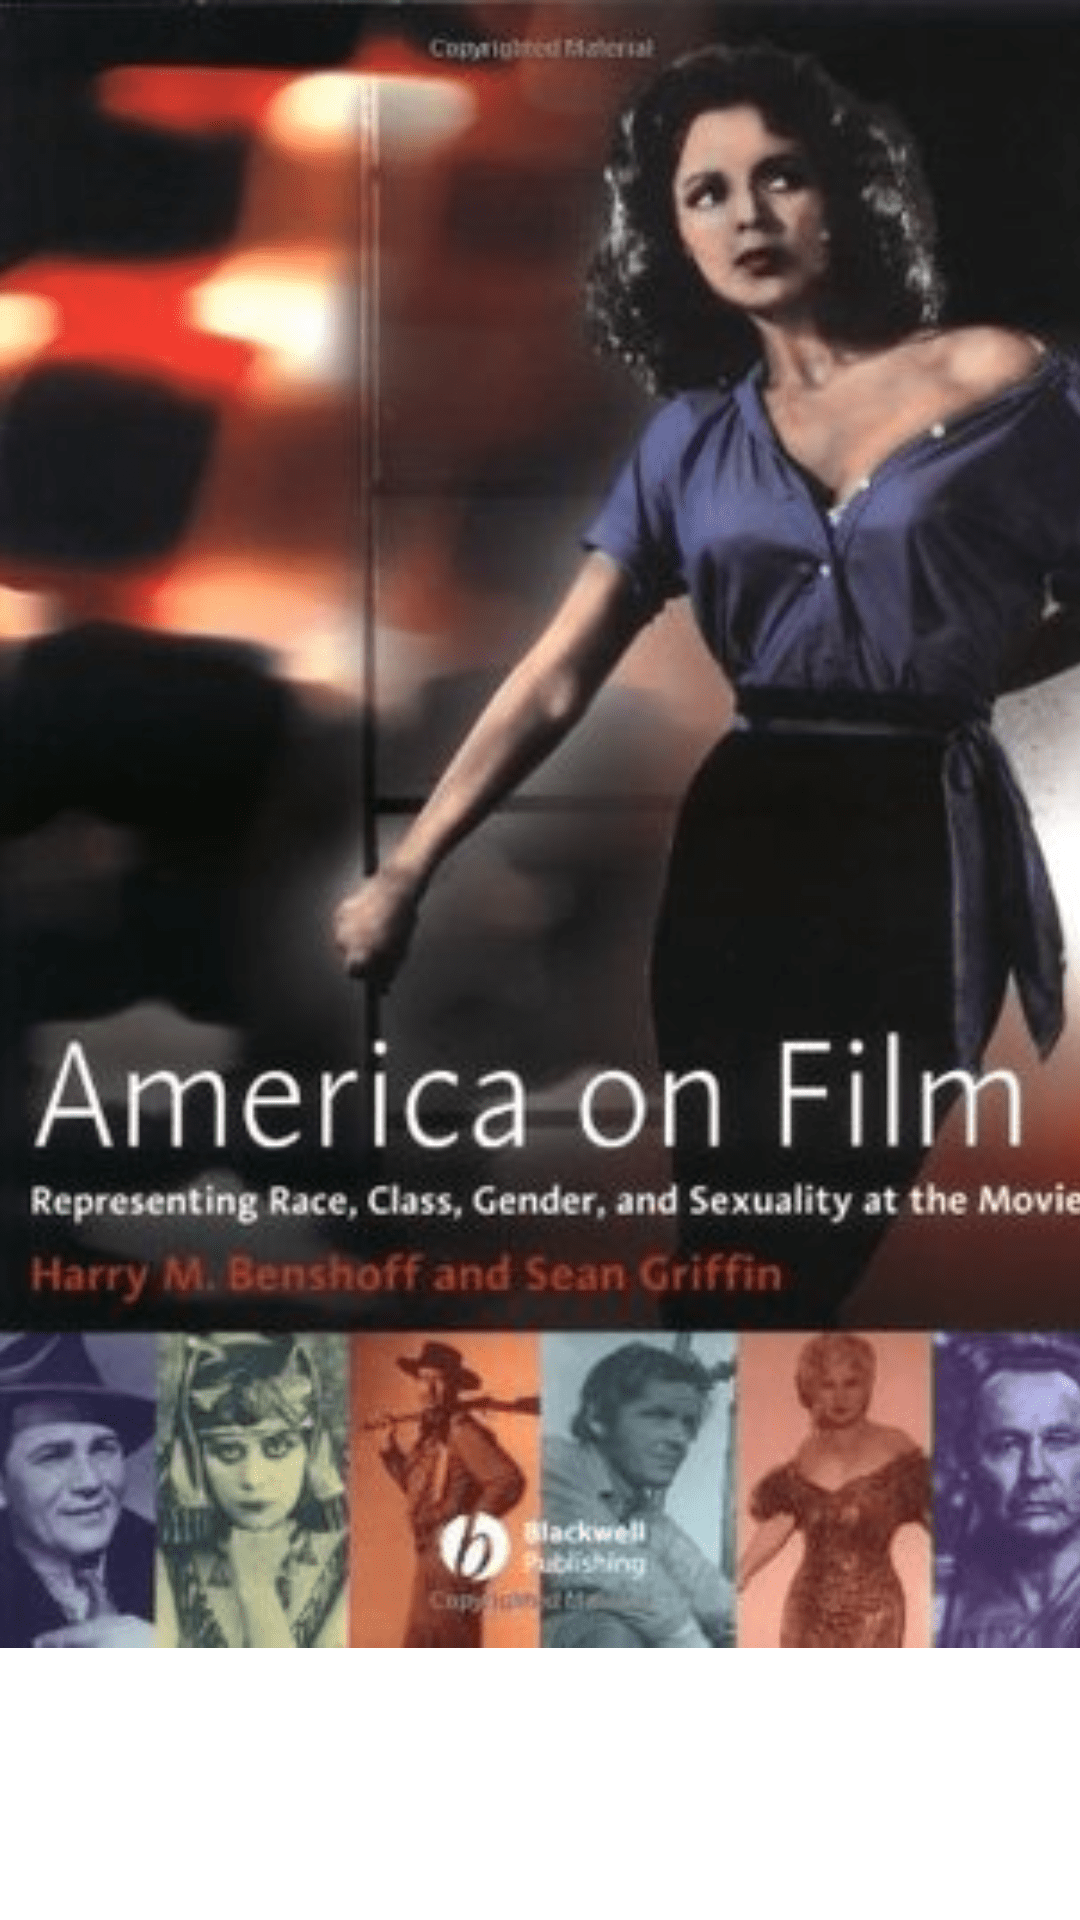 America on Film: Representing Race, Class, Gender, and Sexuality at the Movies